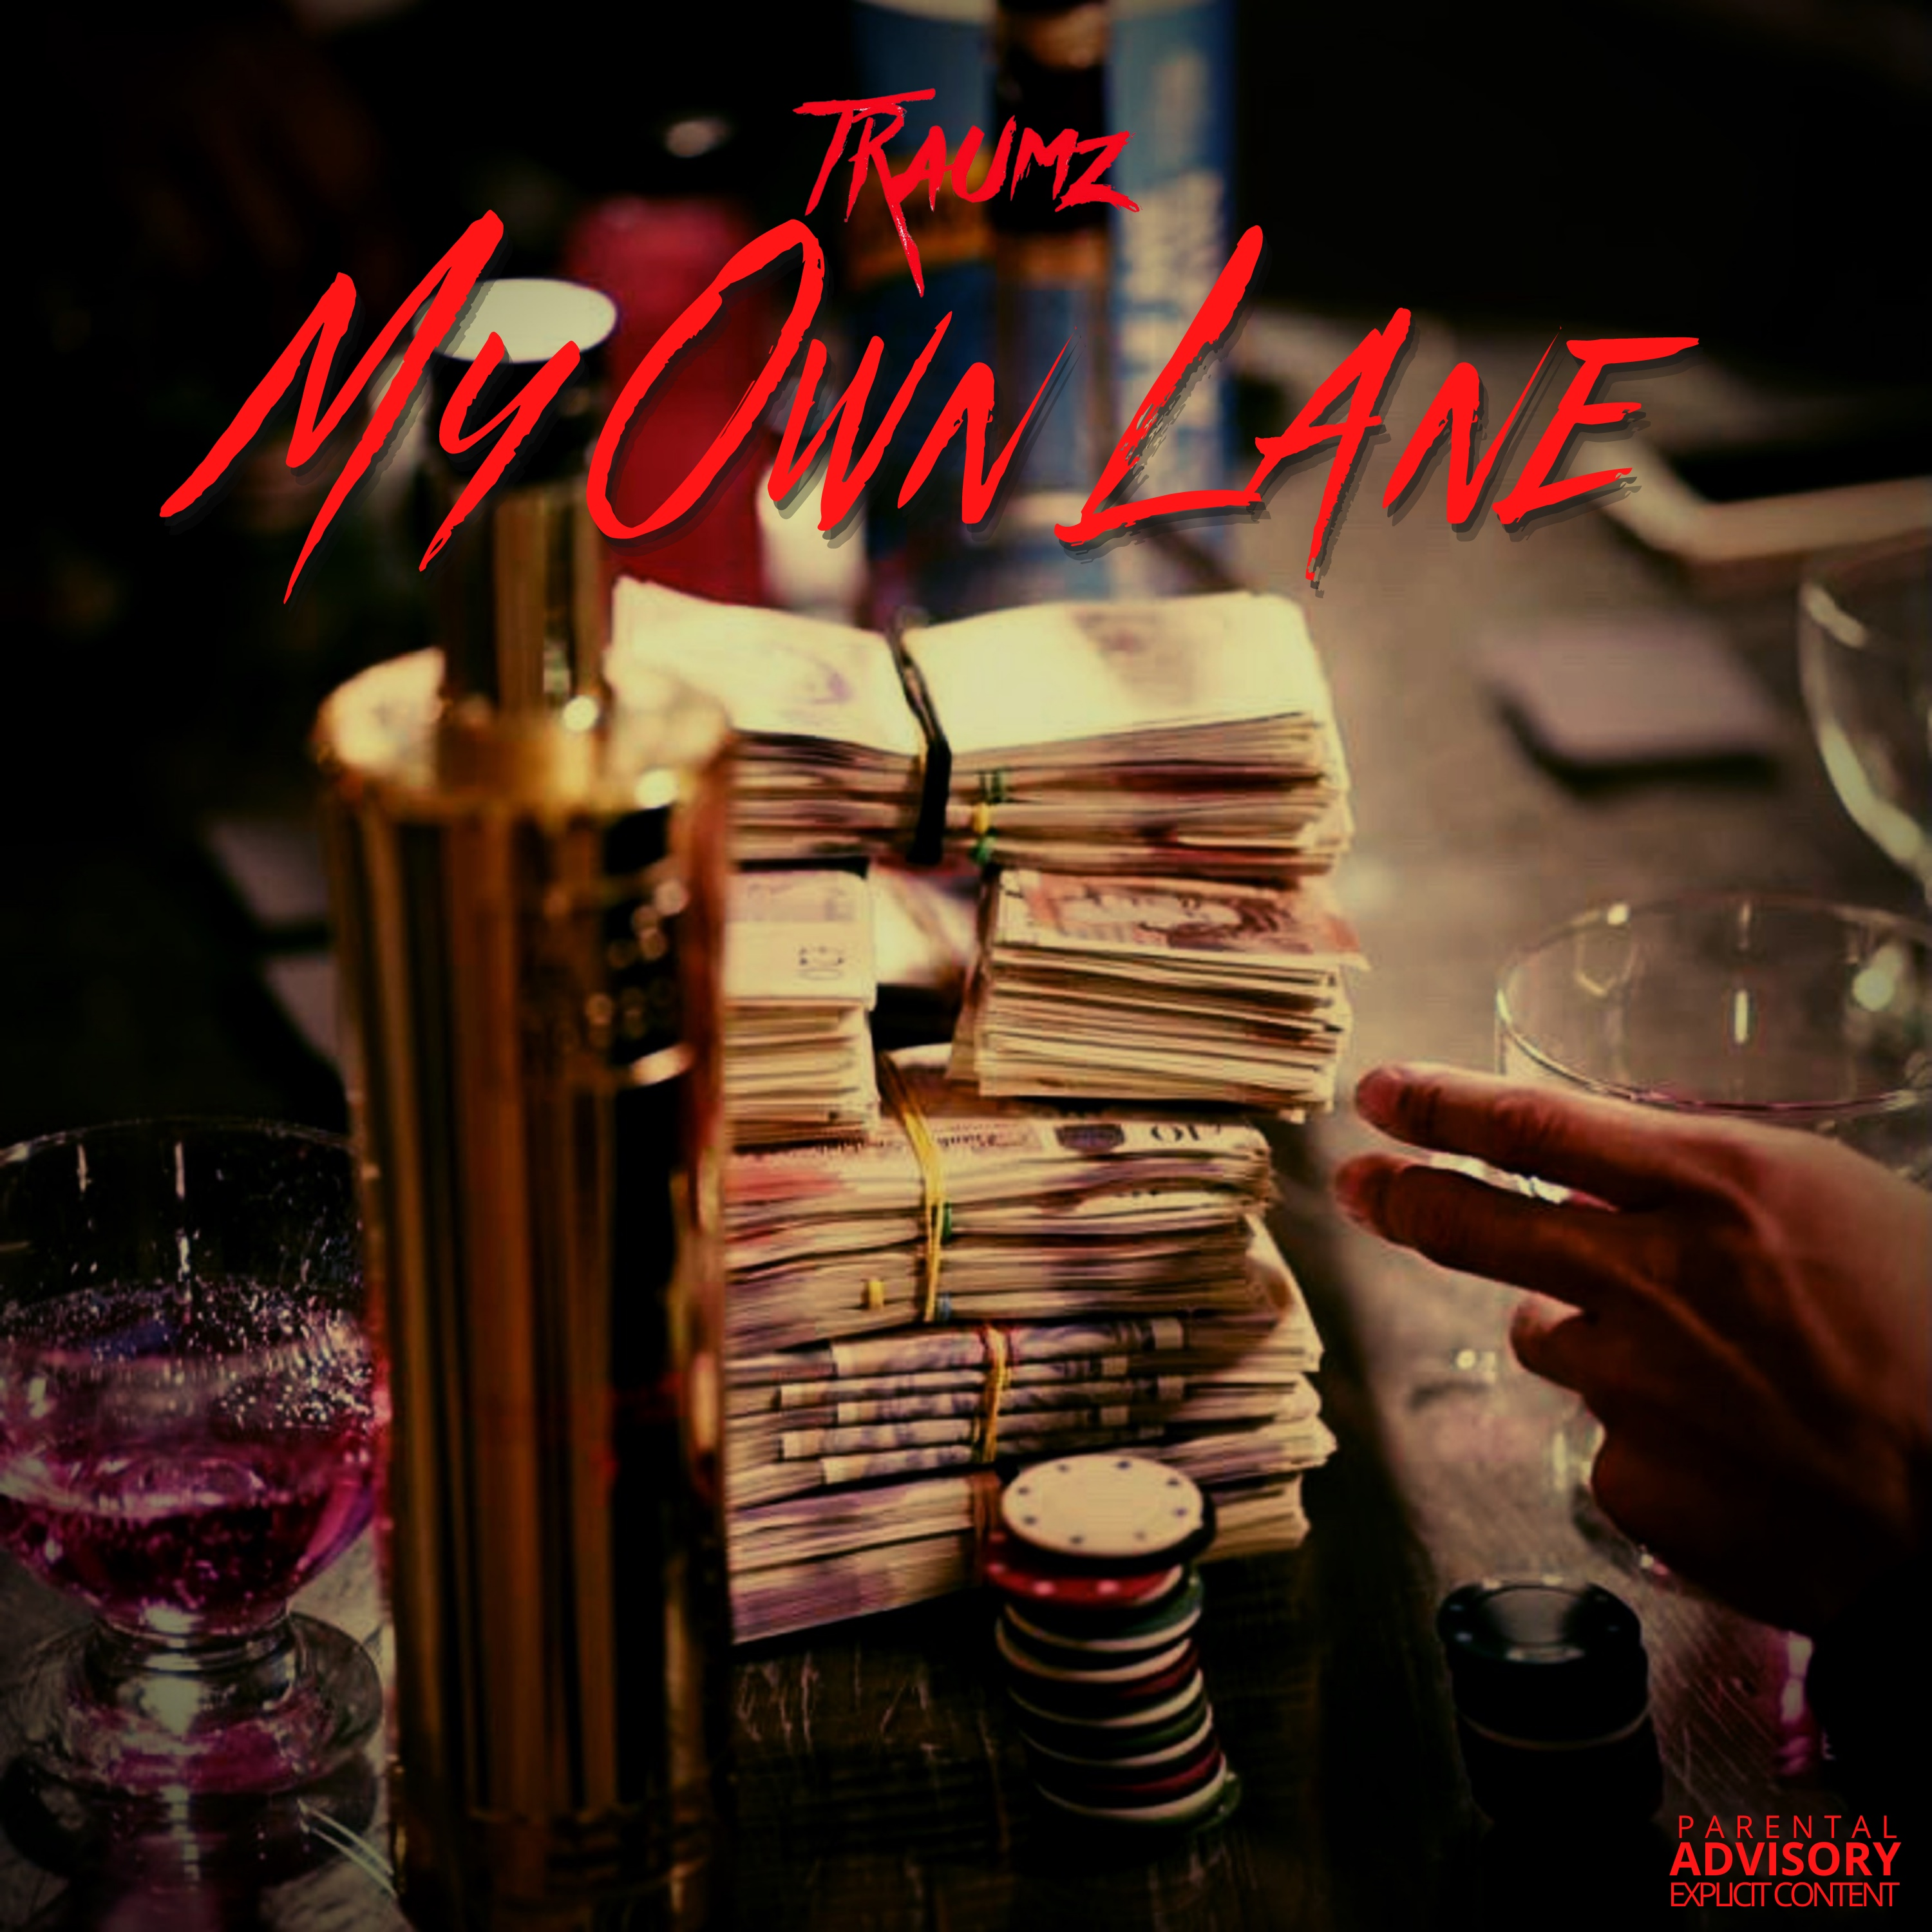 Manchester Based Rapper Traumz Releases New EP 'My Own Lane' 